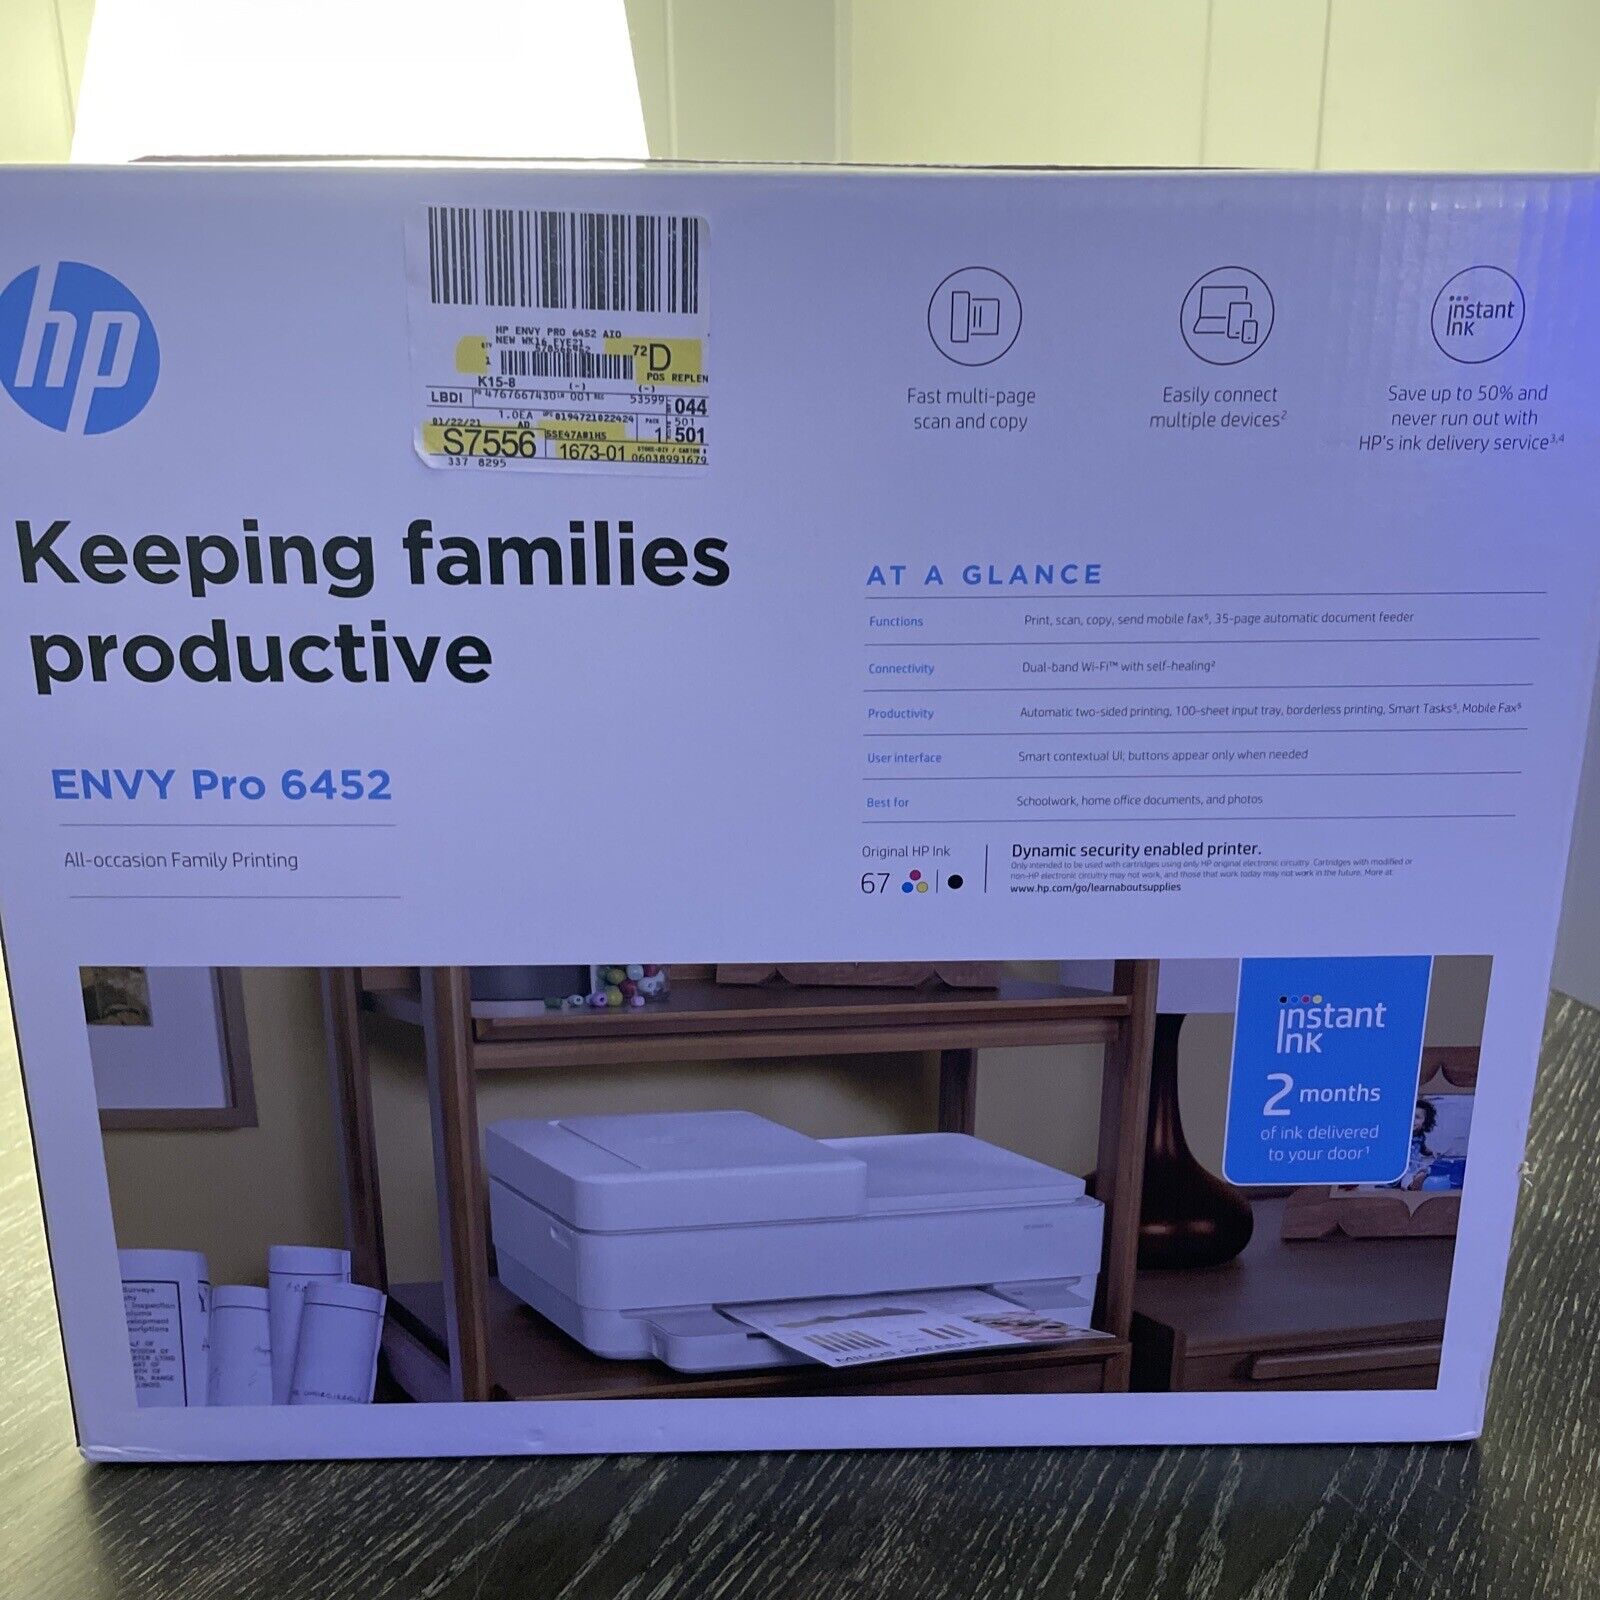 NEW Tested = HP ENVY Pro 6452 Wireless All-in-One Color Inkjet Printer - White